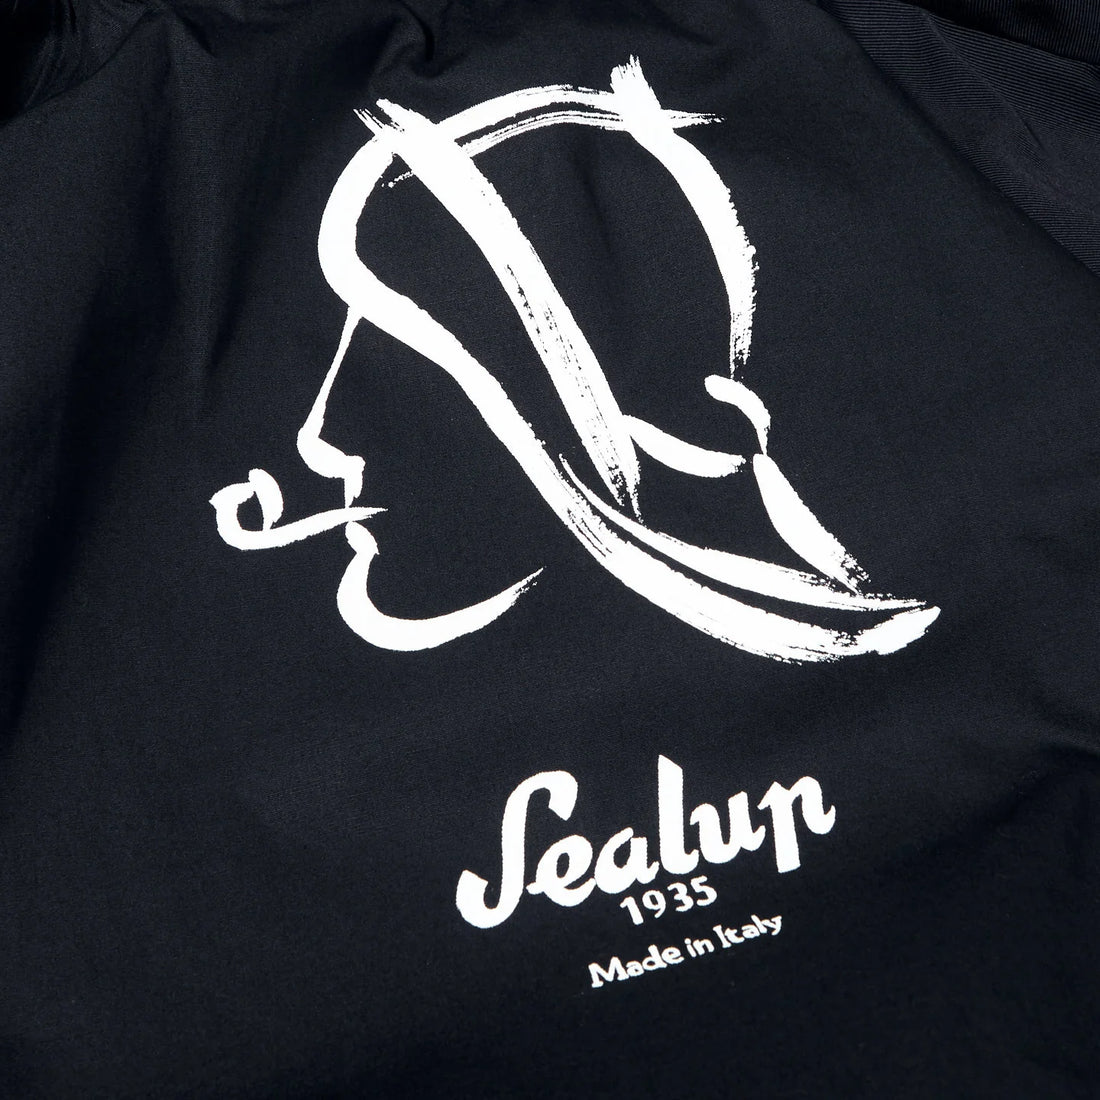 Black fabric featuring a white stylized logo of a face in profile with the text "sealup 1935 made in italy" below.